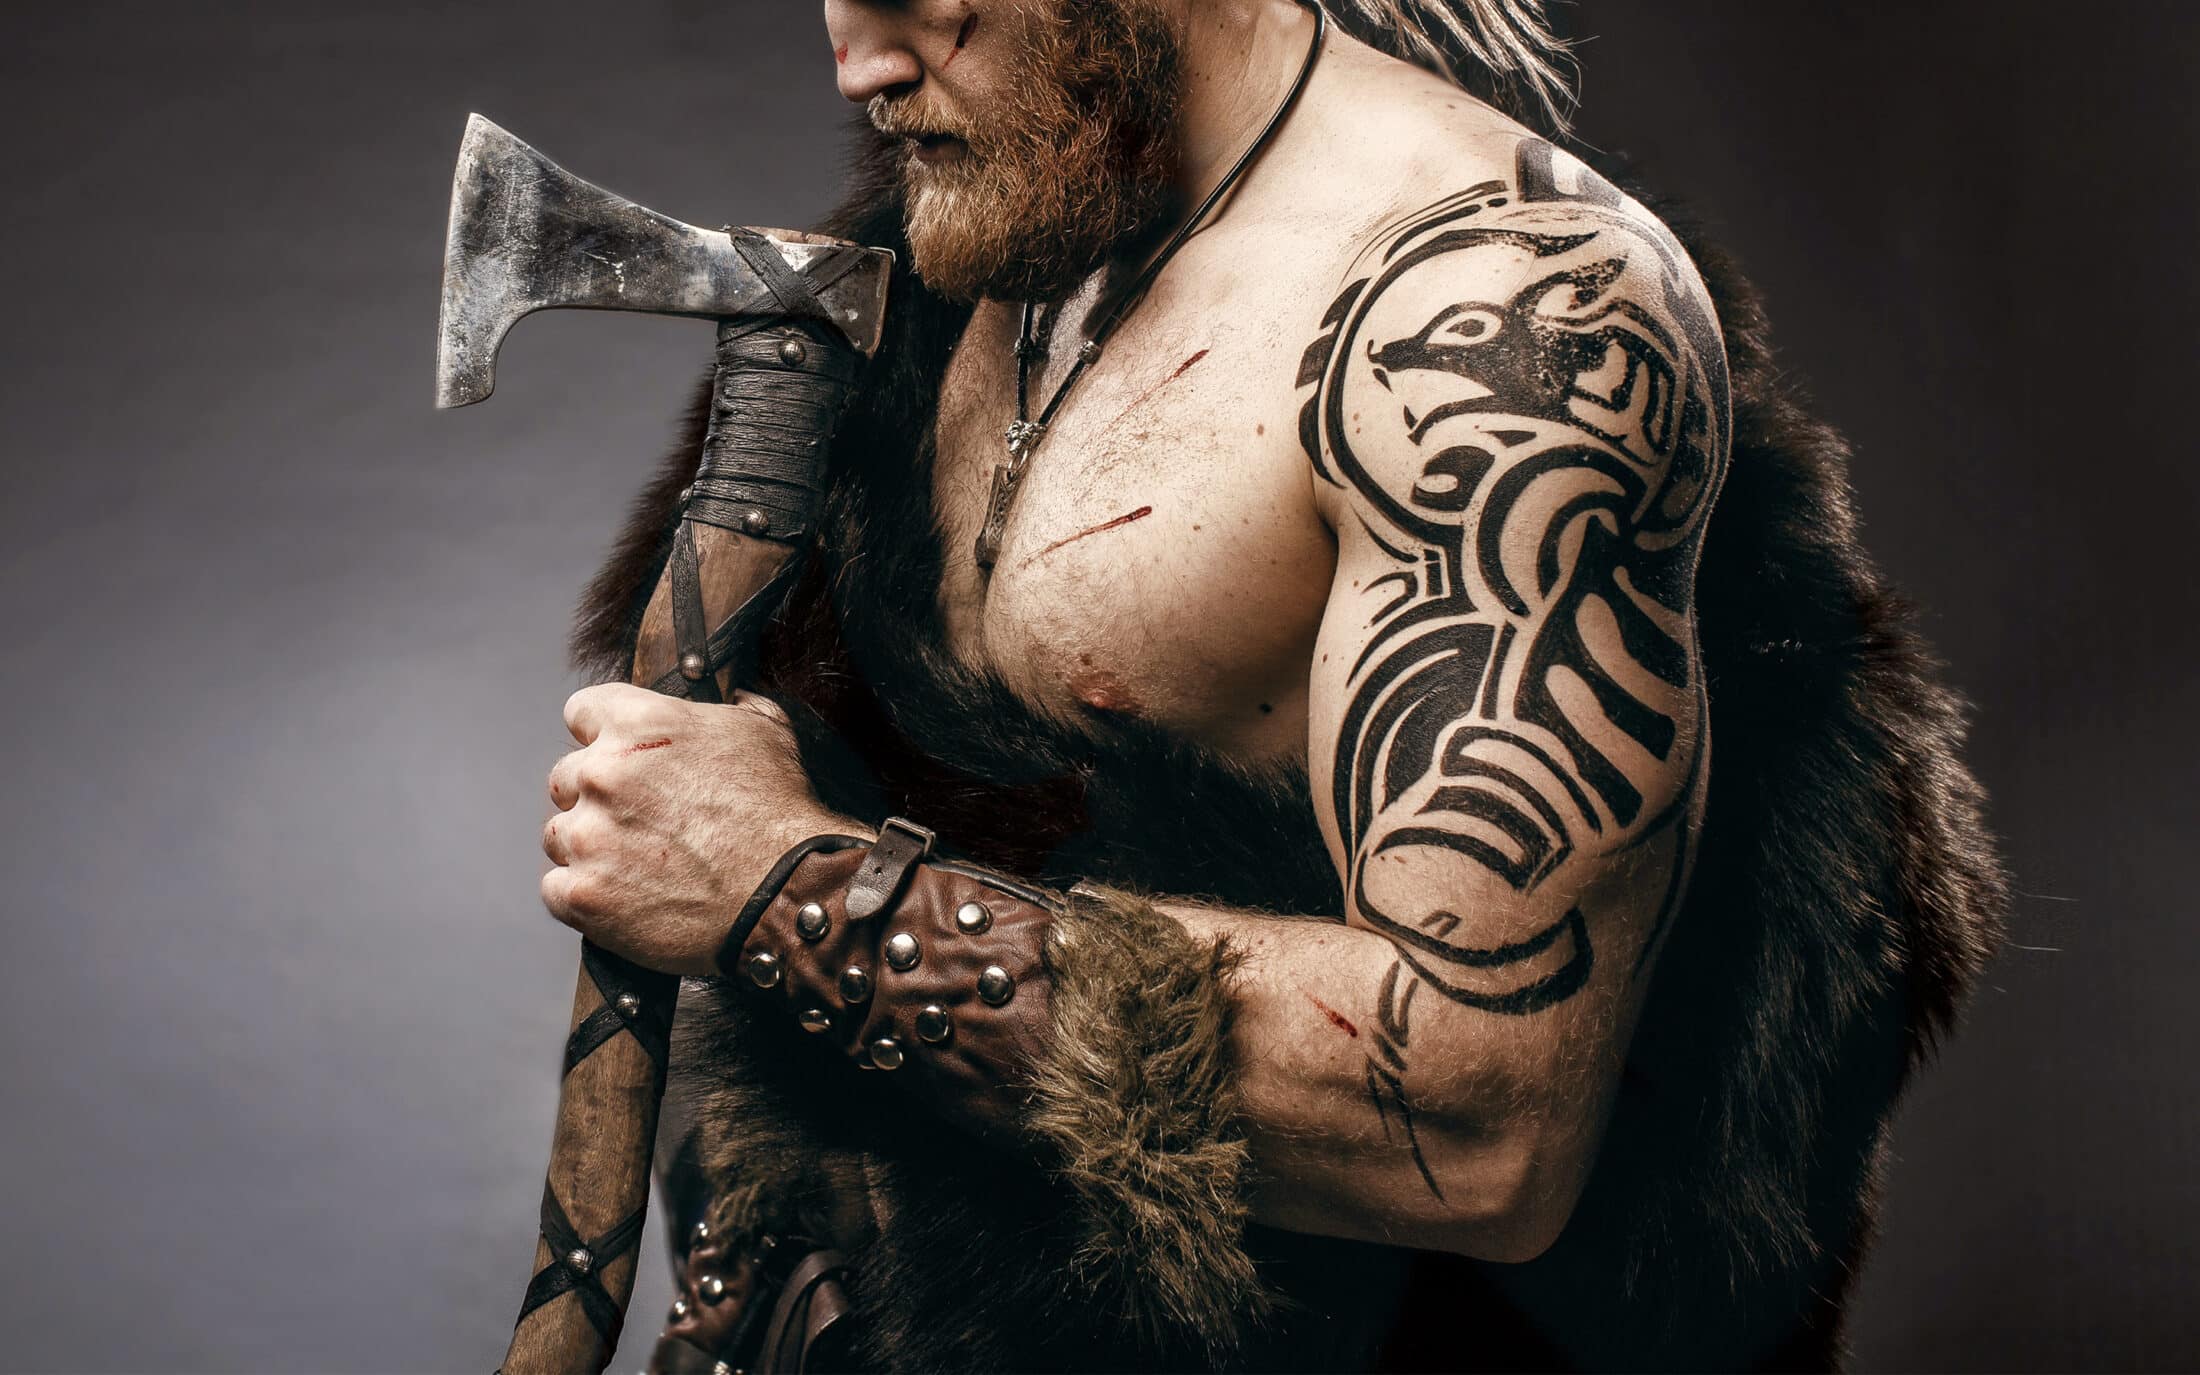 The Controversial Truth: Modern Christians And Tattoos - Are Greek And Viking Mythology Designs A Sin?